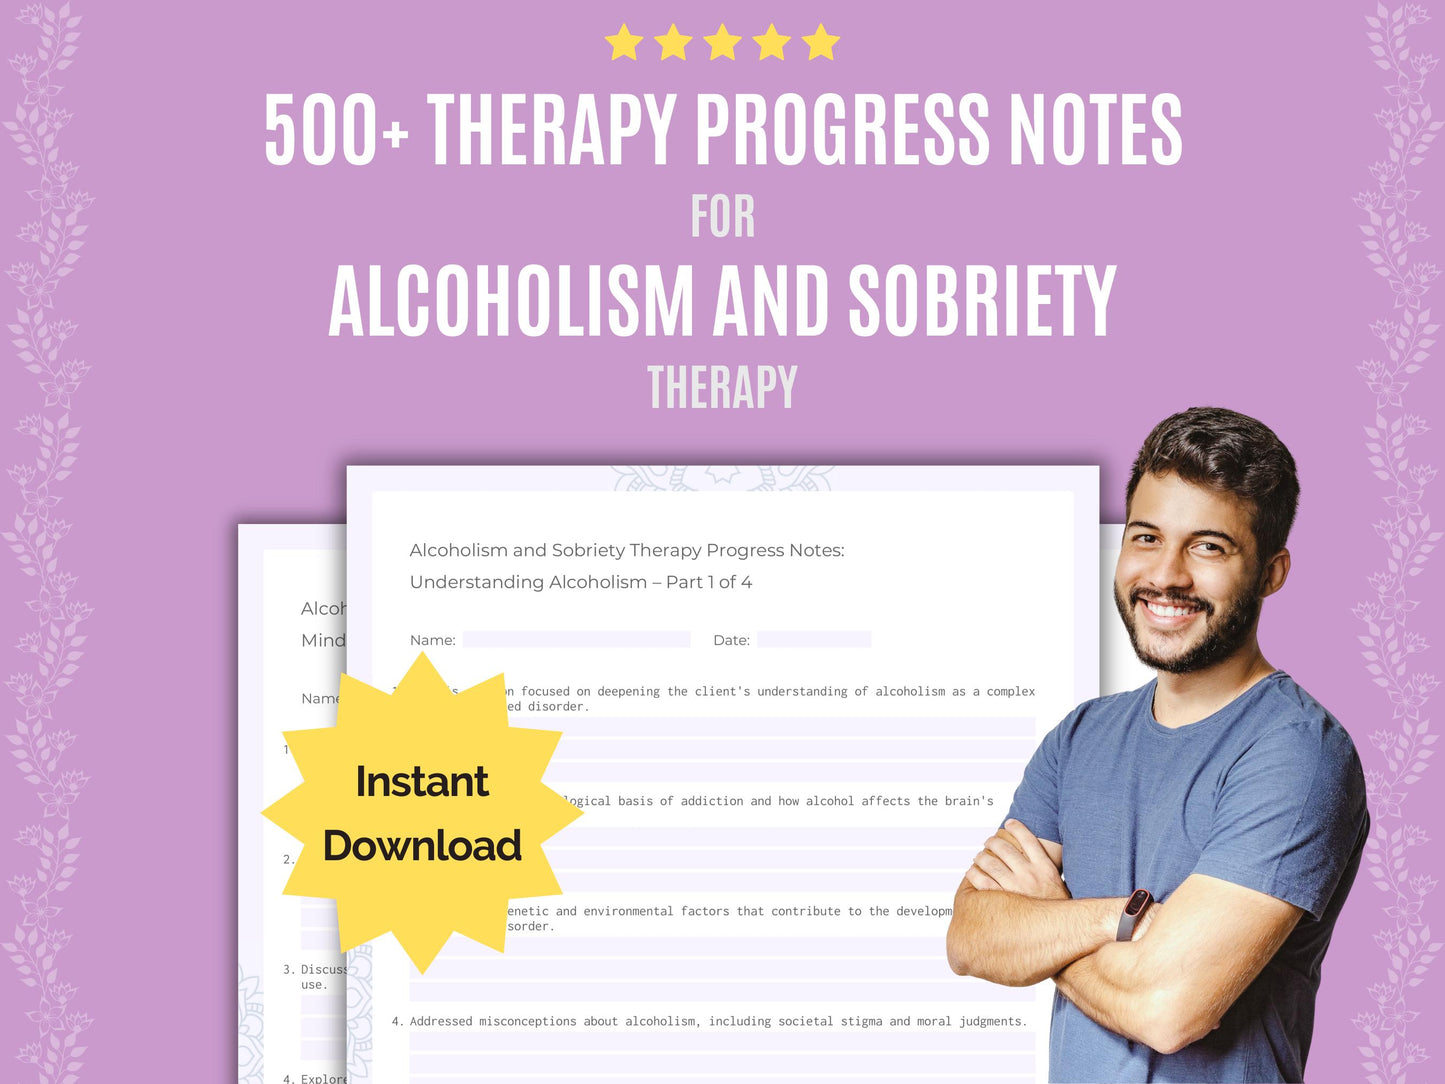 Alcoholism and Sobriety Therapy